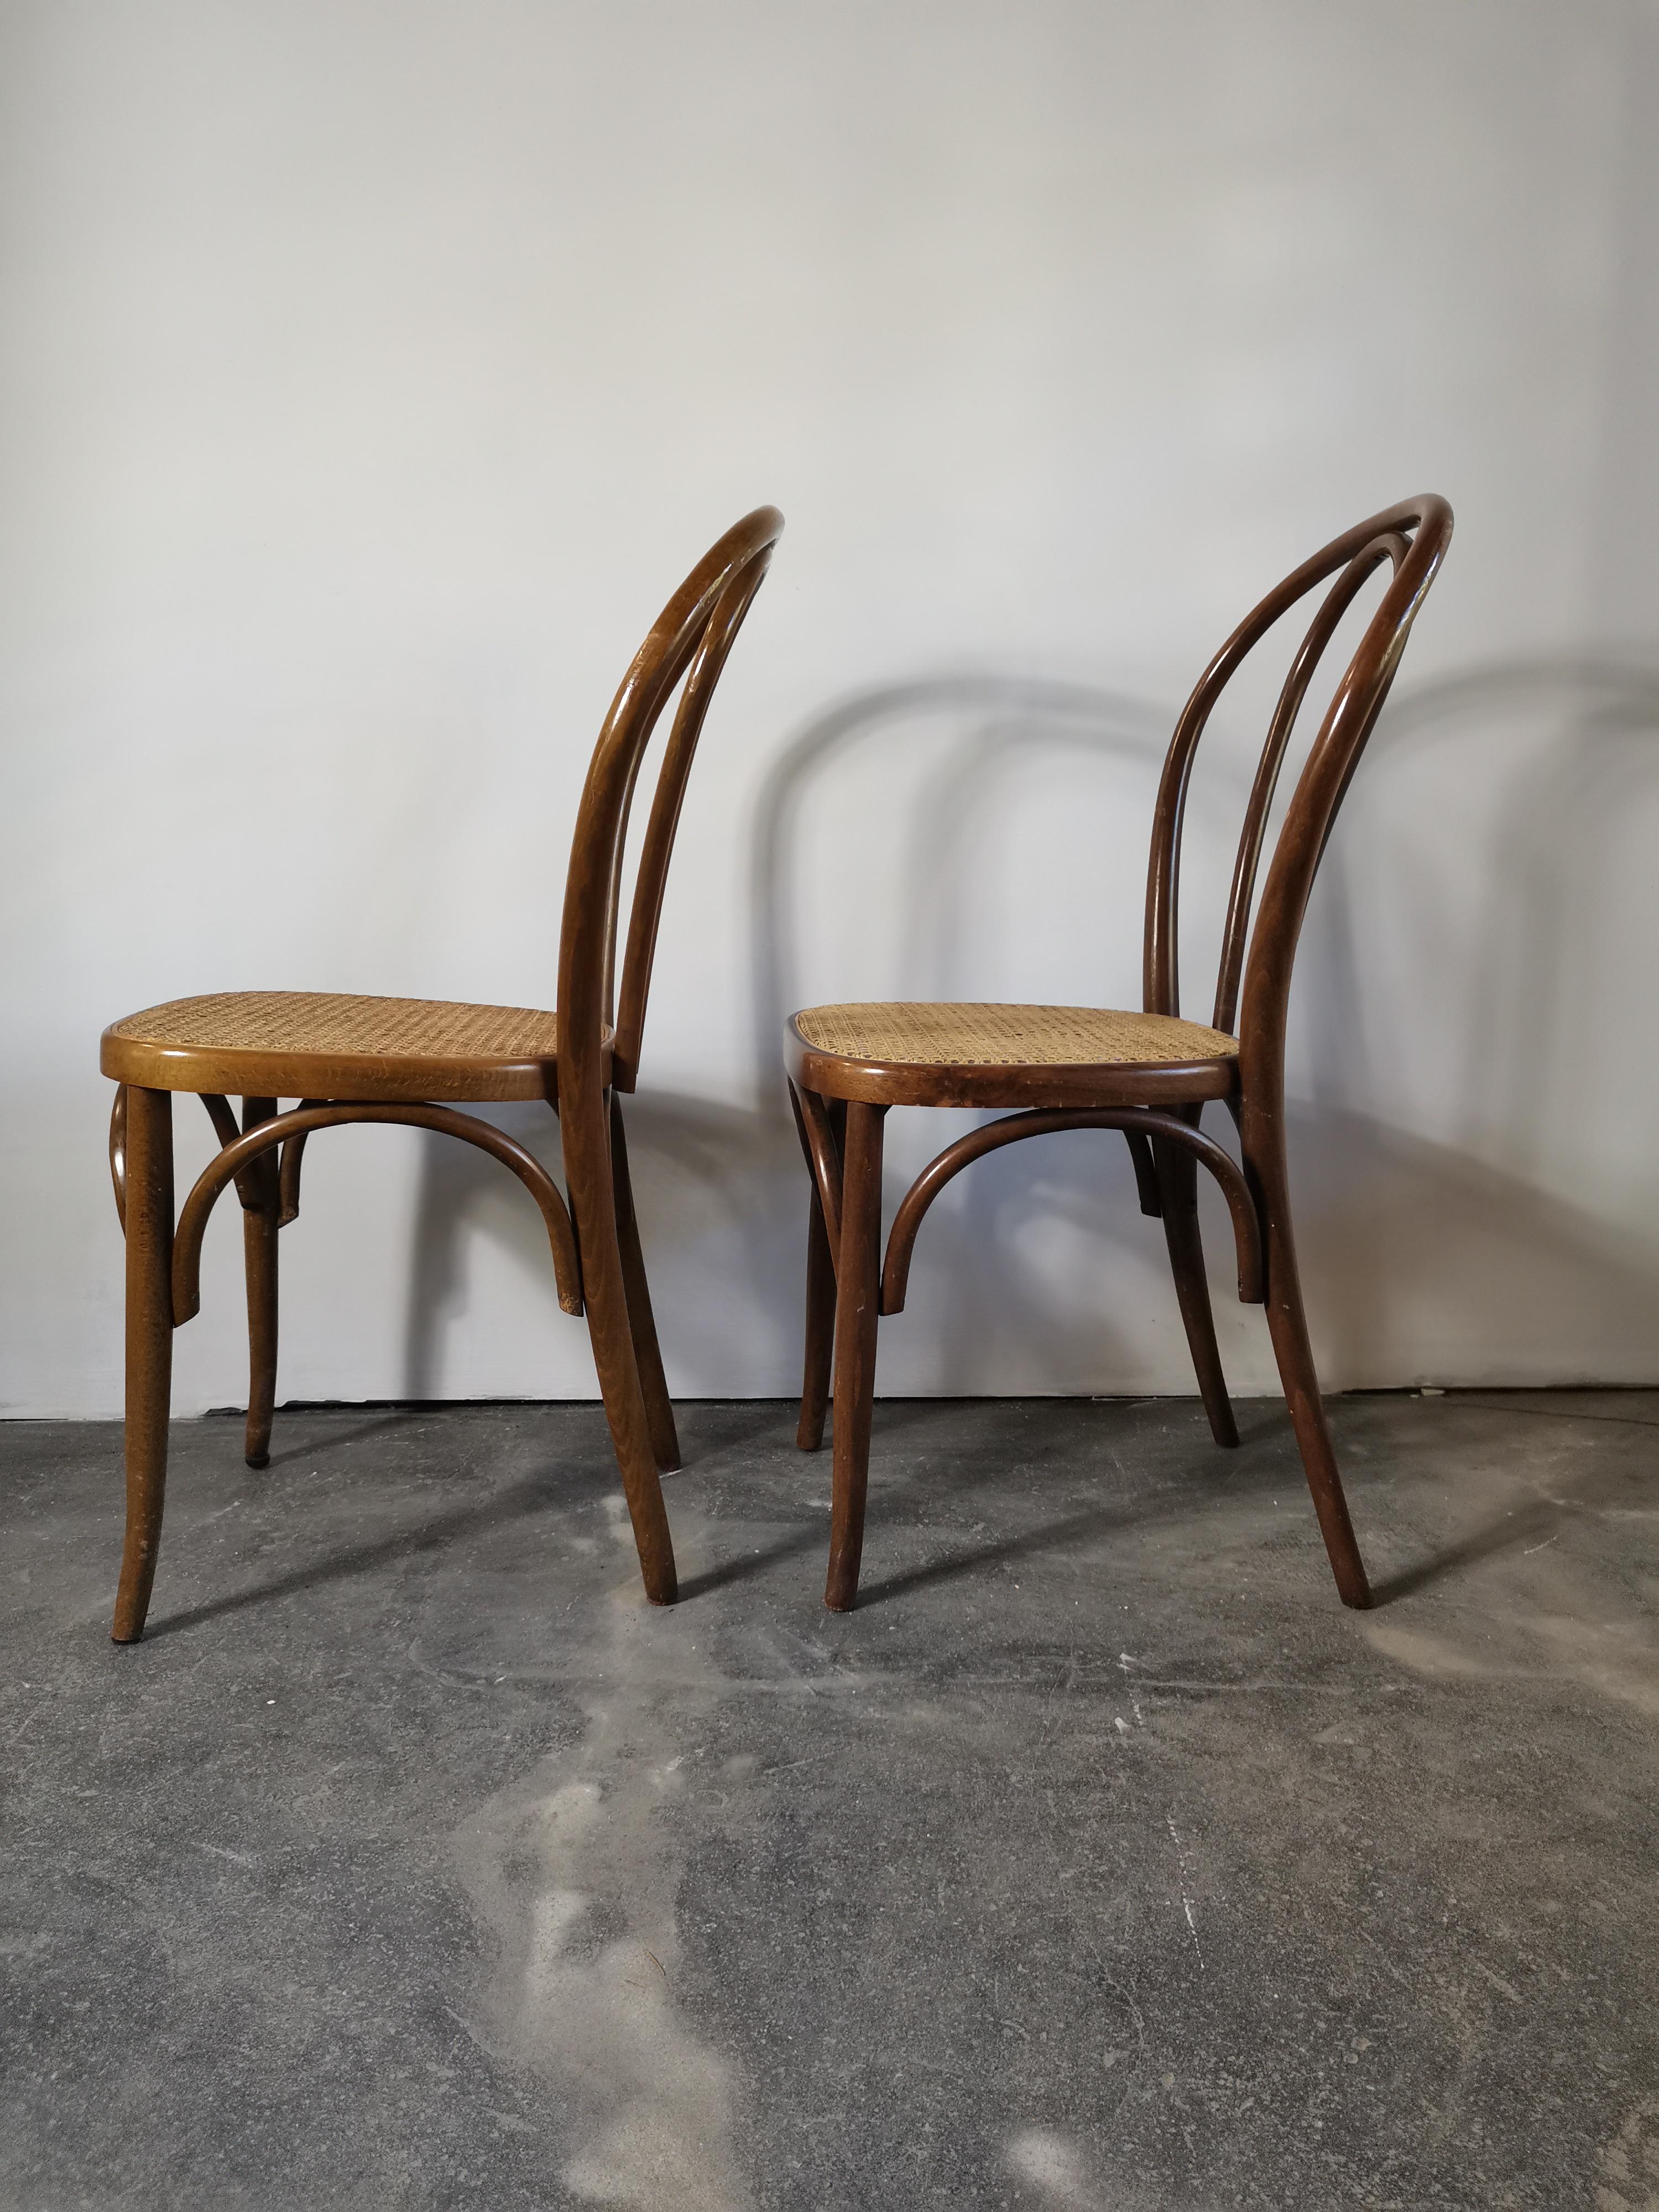 Mid-20th Century Bentwood No. 18, 1960s 1 of 2 For Sale